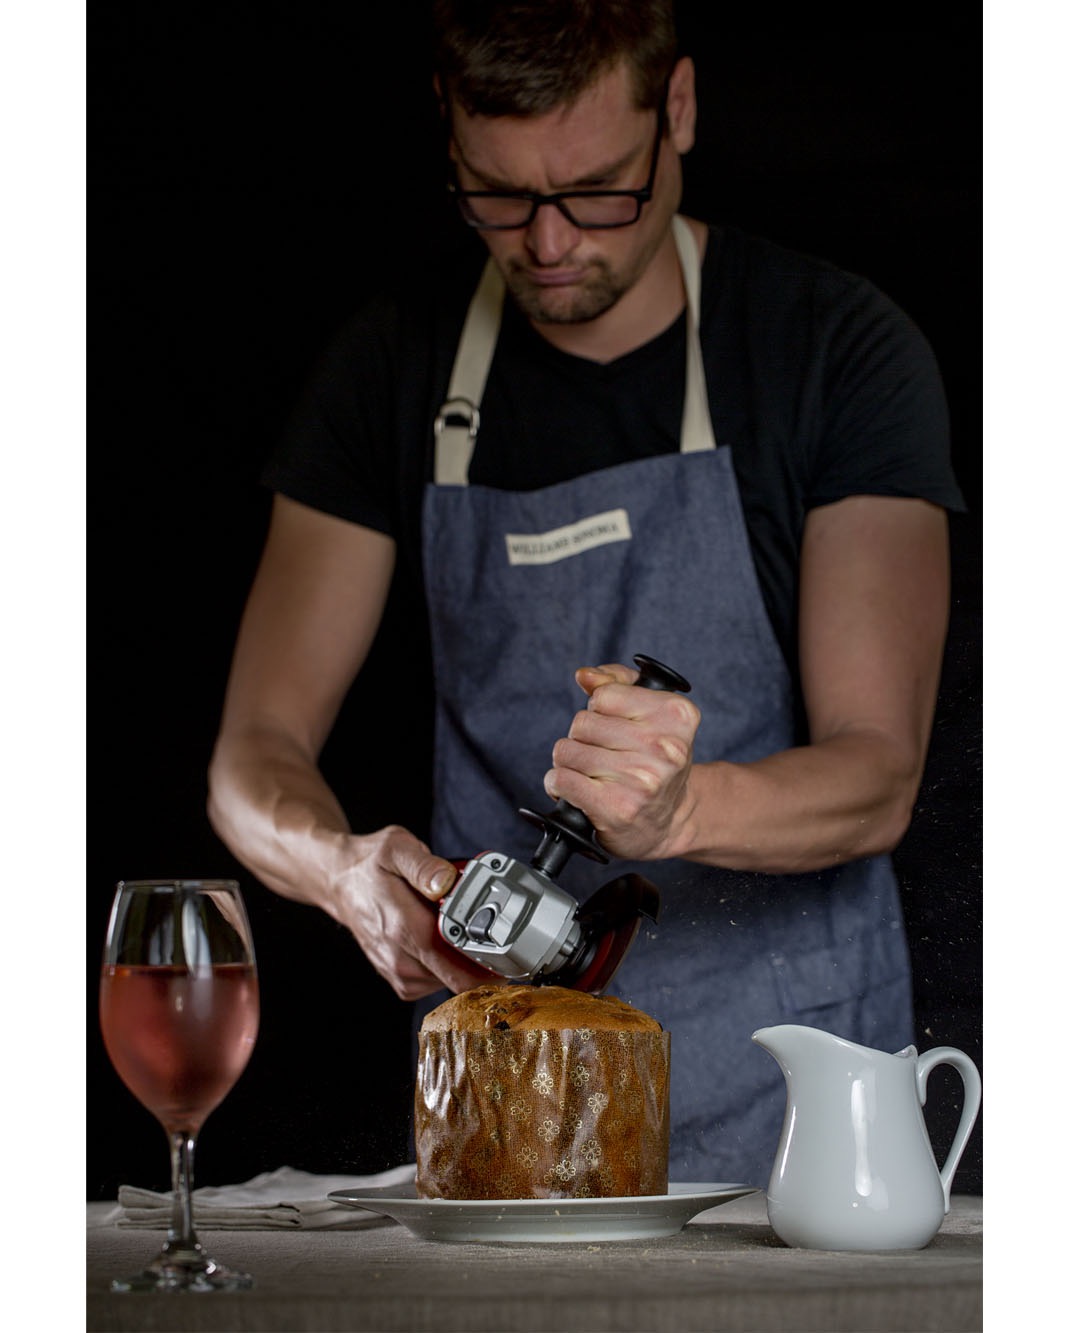 Portrait of the Photographer Will Engelmann wearing an apron and cutting a panettone with a grinder.